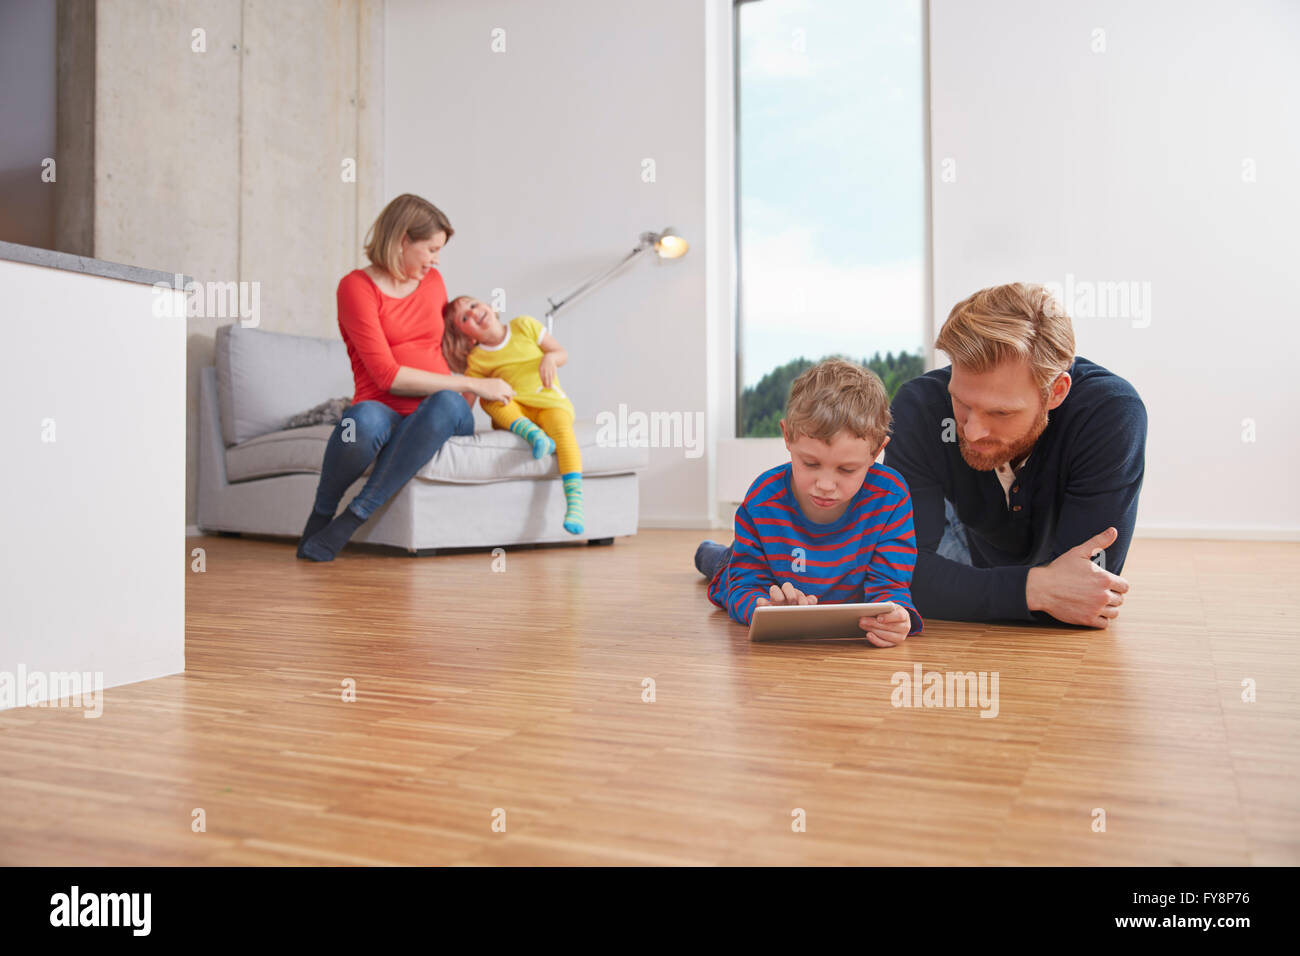 Fathar and son with digital tablet lying on floor Stock Photo